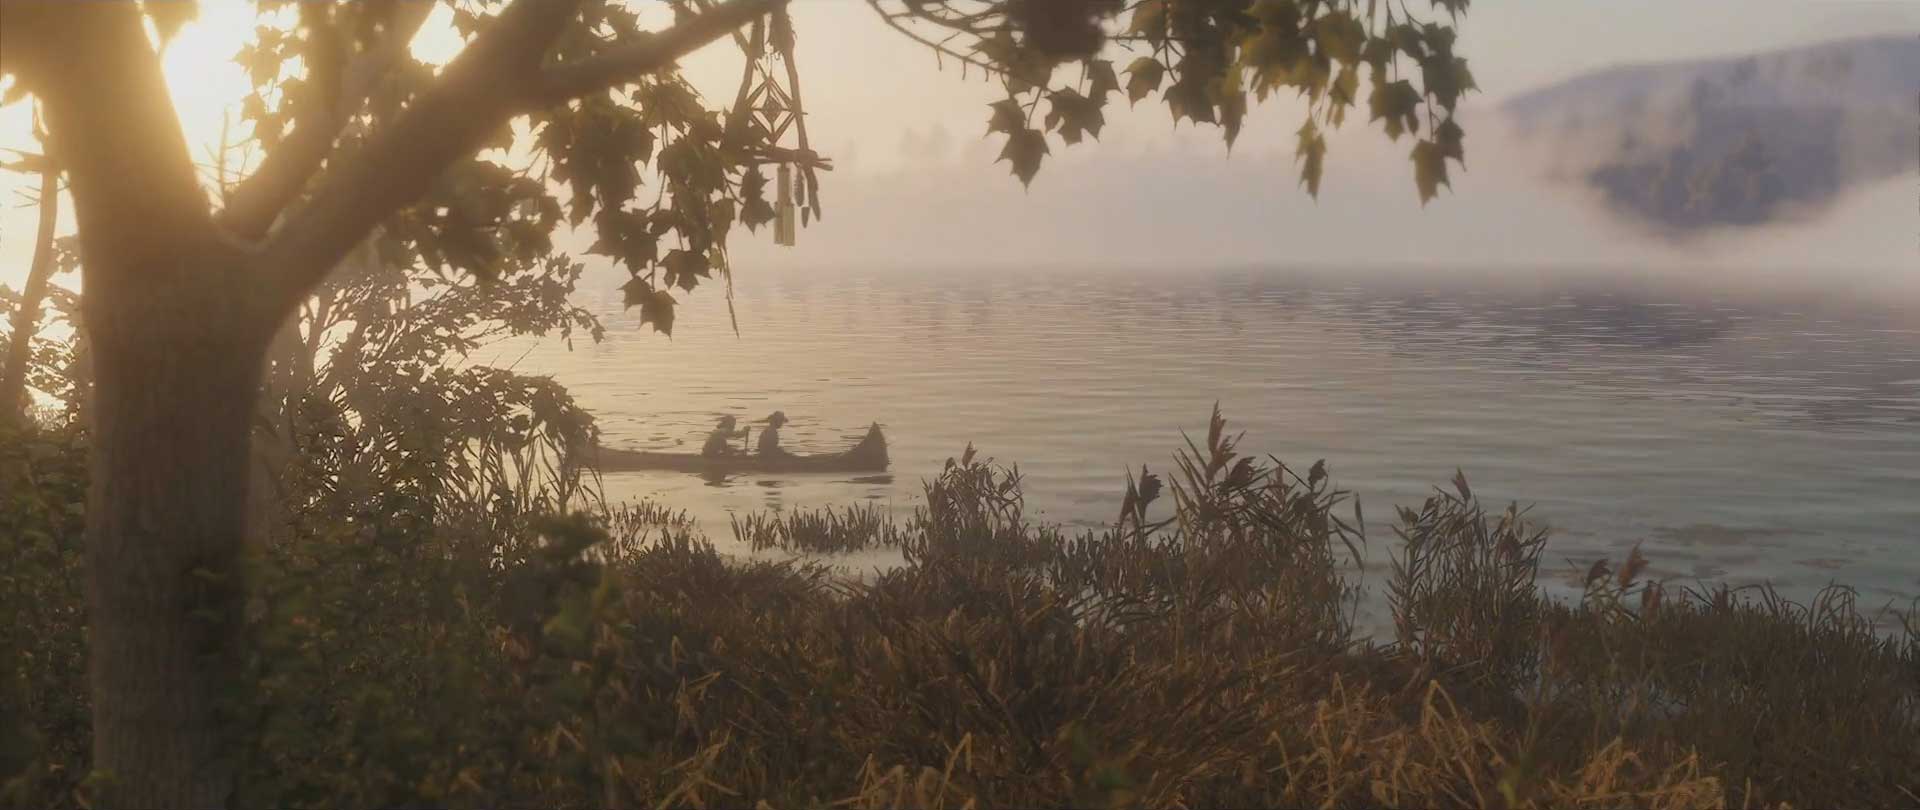 red_dead_redemption_2_trailer_screen_grab_lake